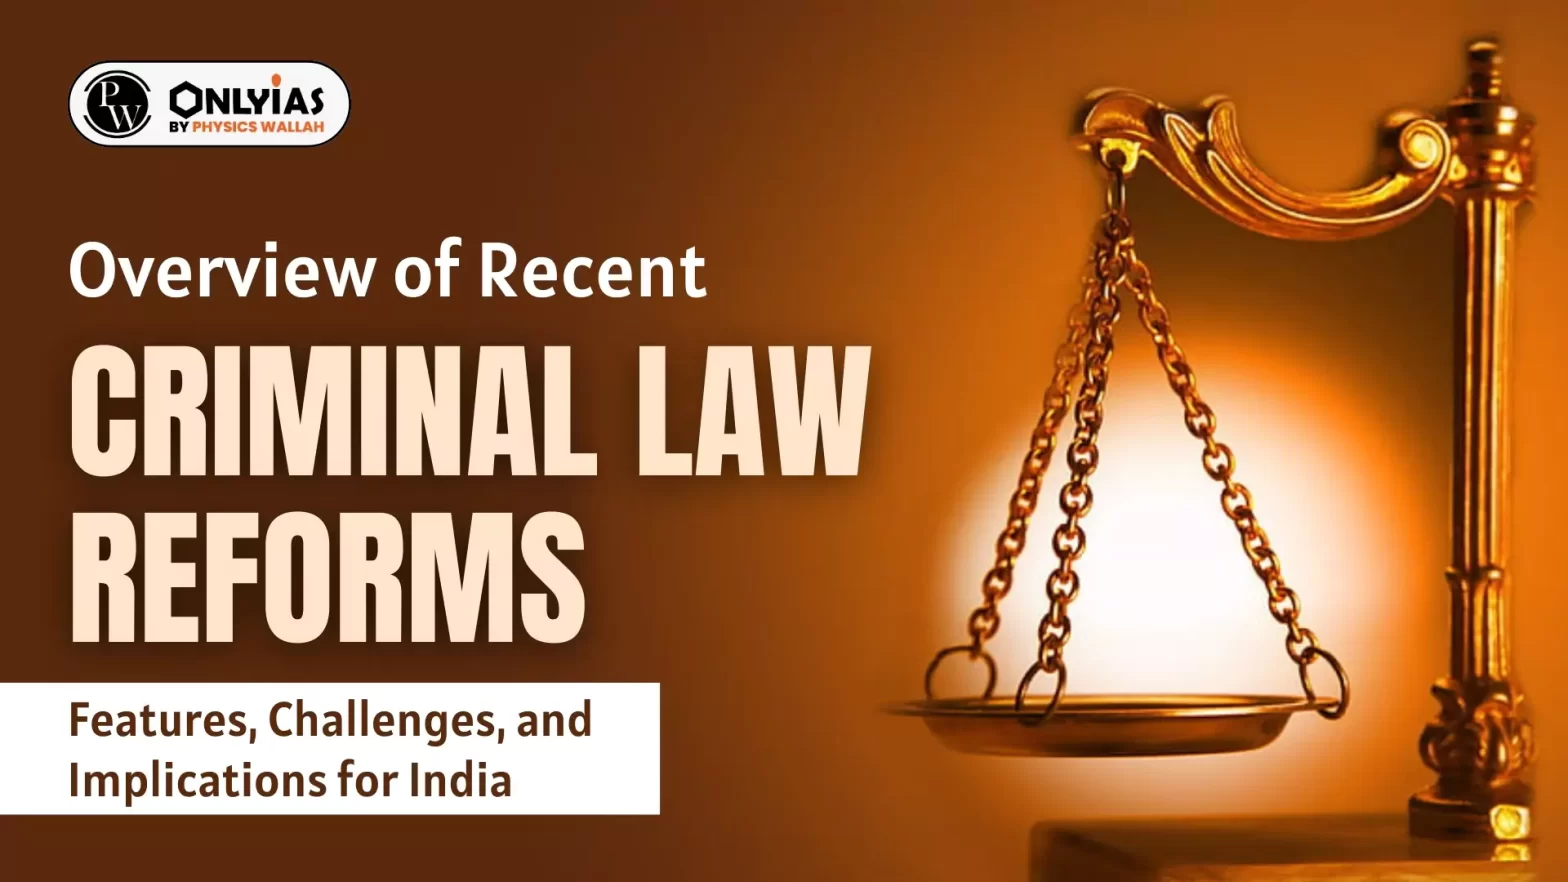 Overview of Recent Criminal Law Reforms: Features, Challenges, and Implications for India